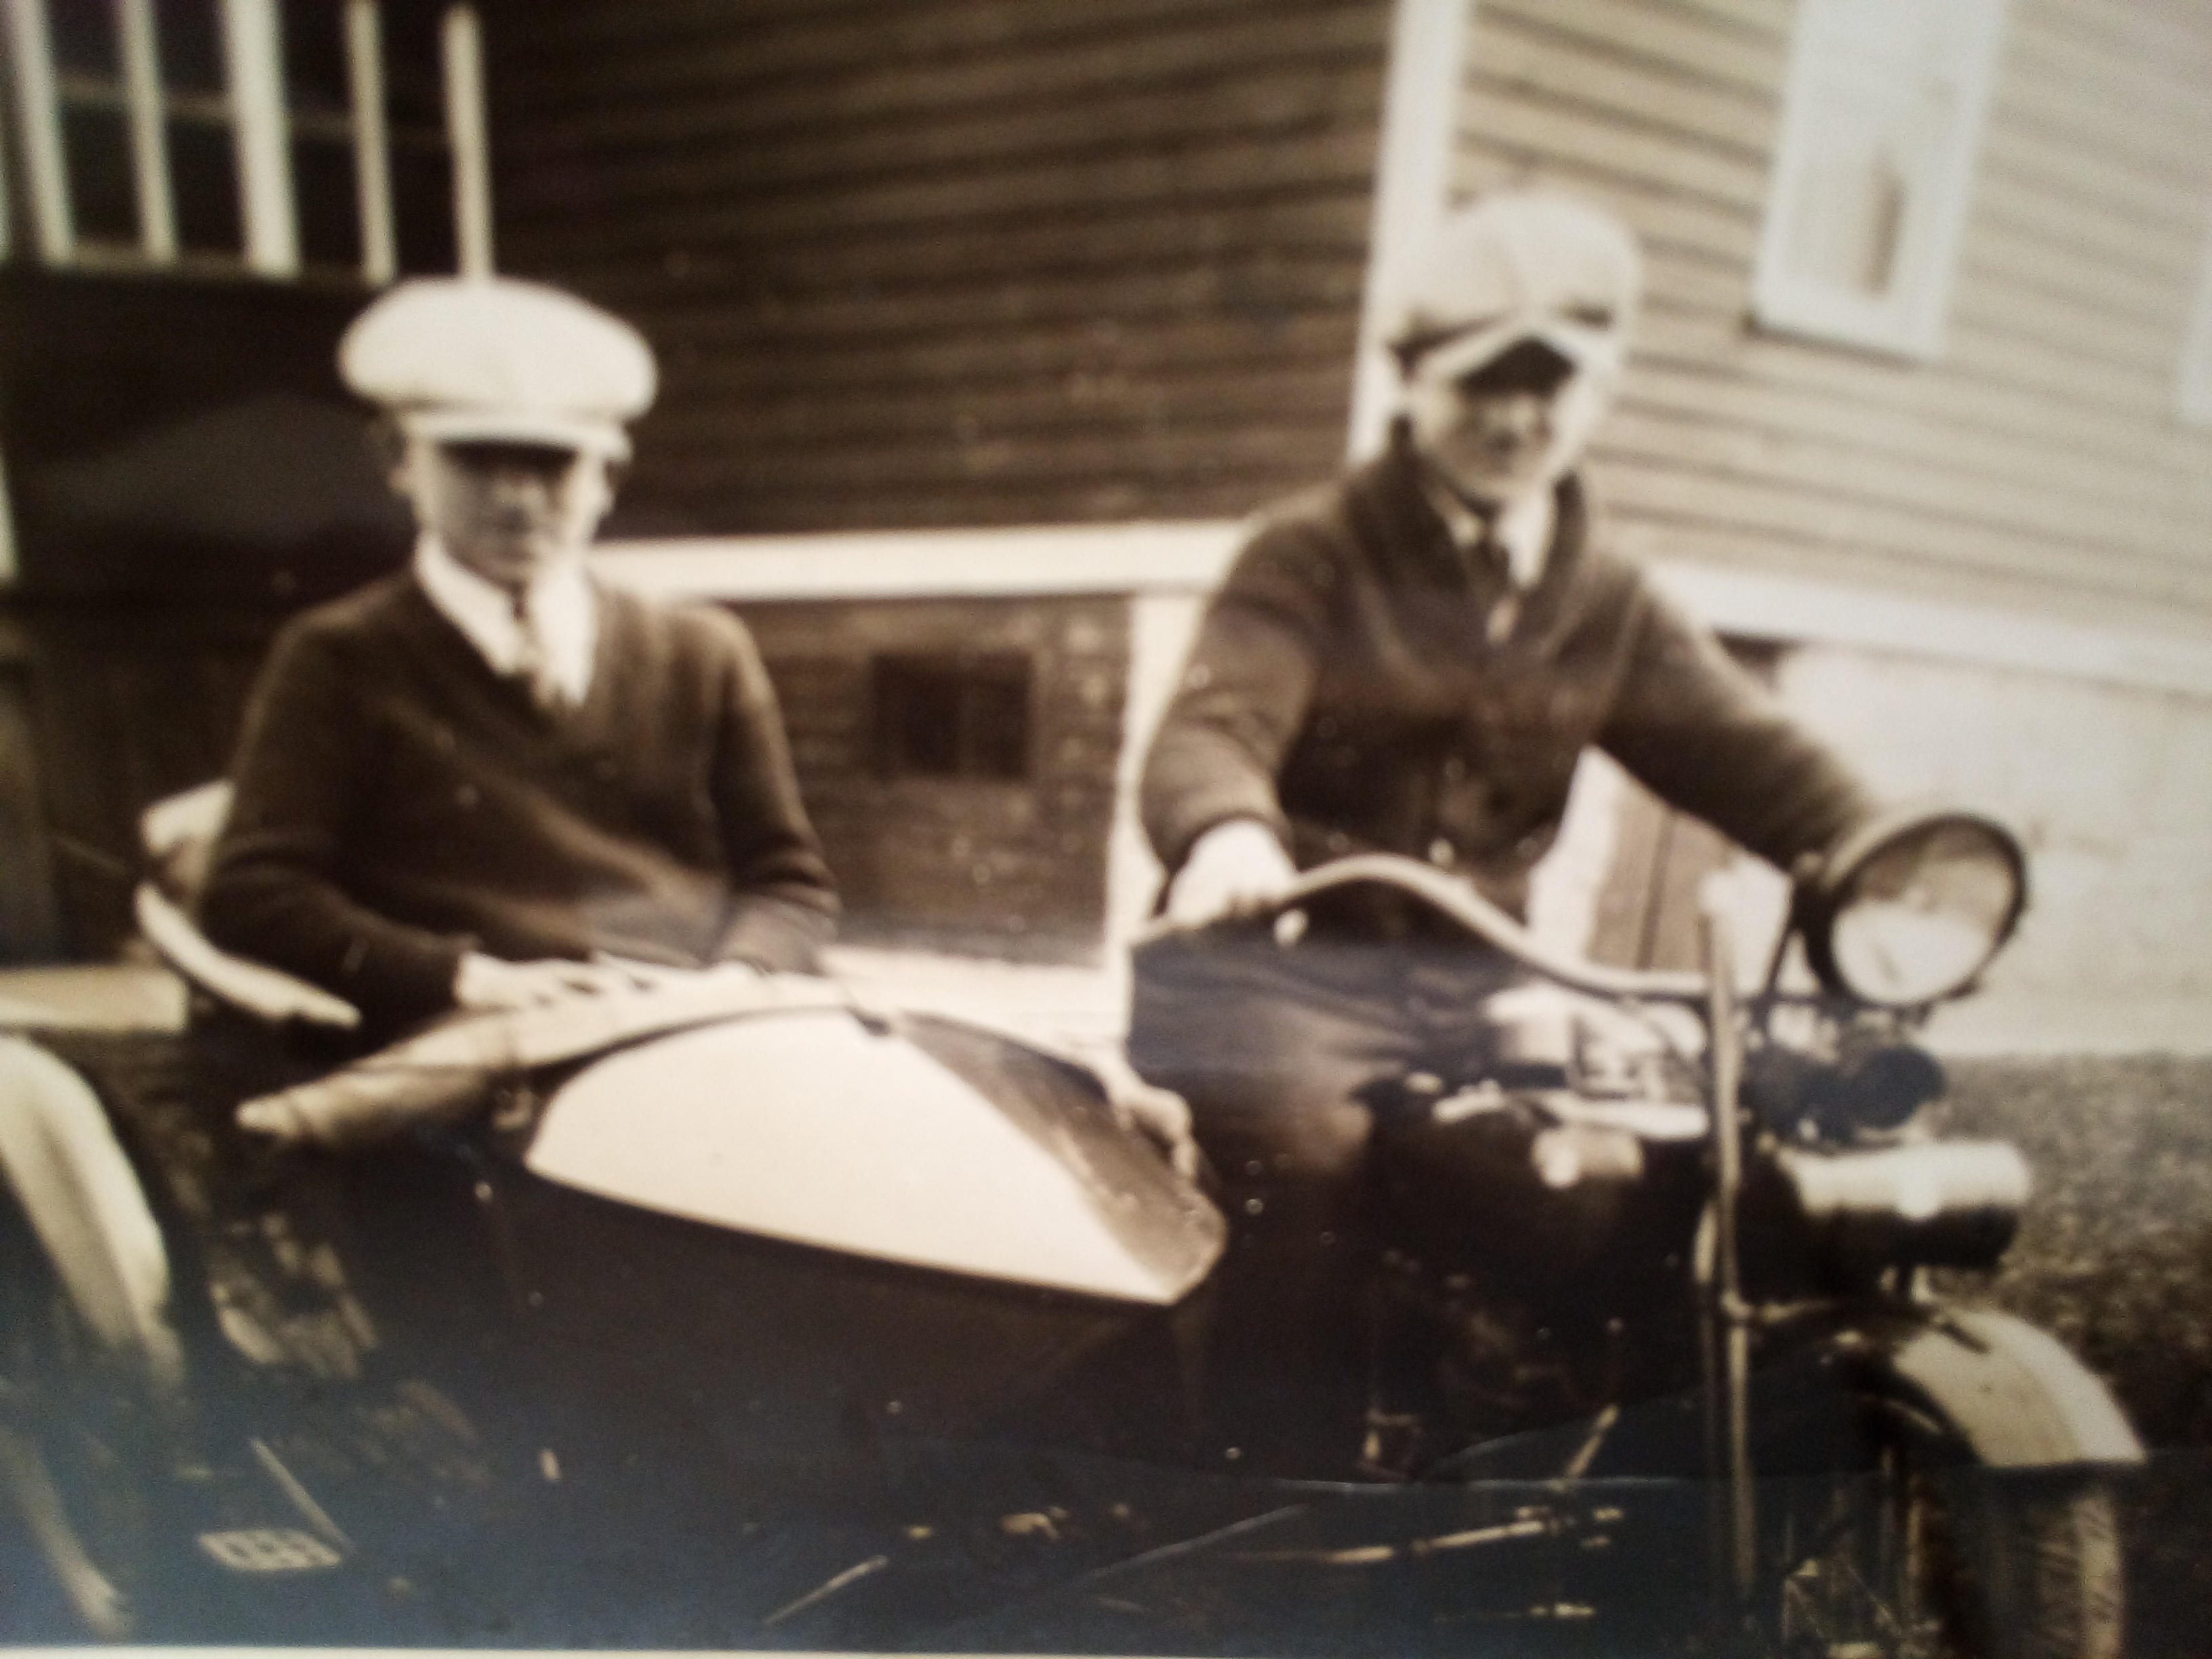 The early motorcycles